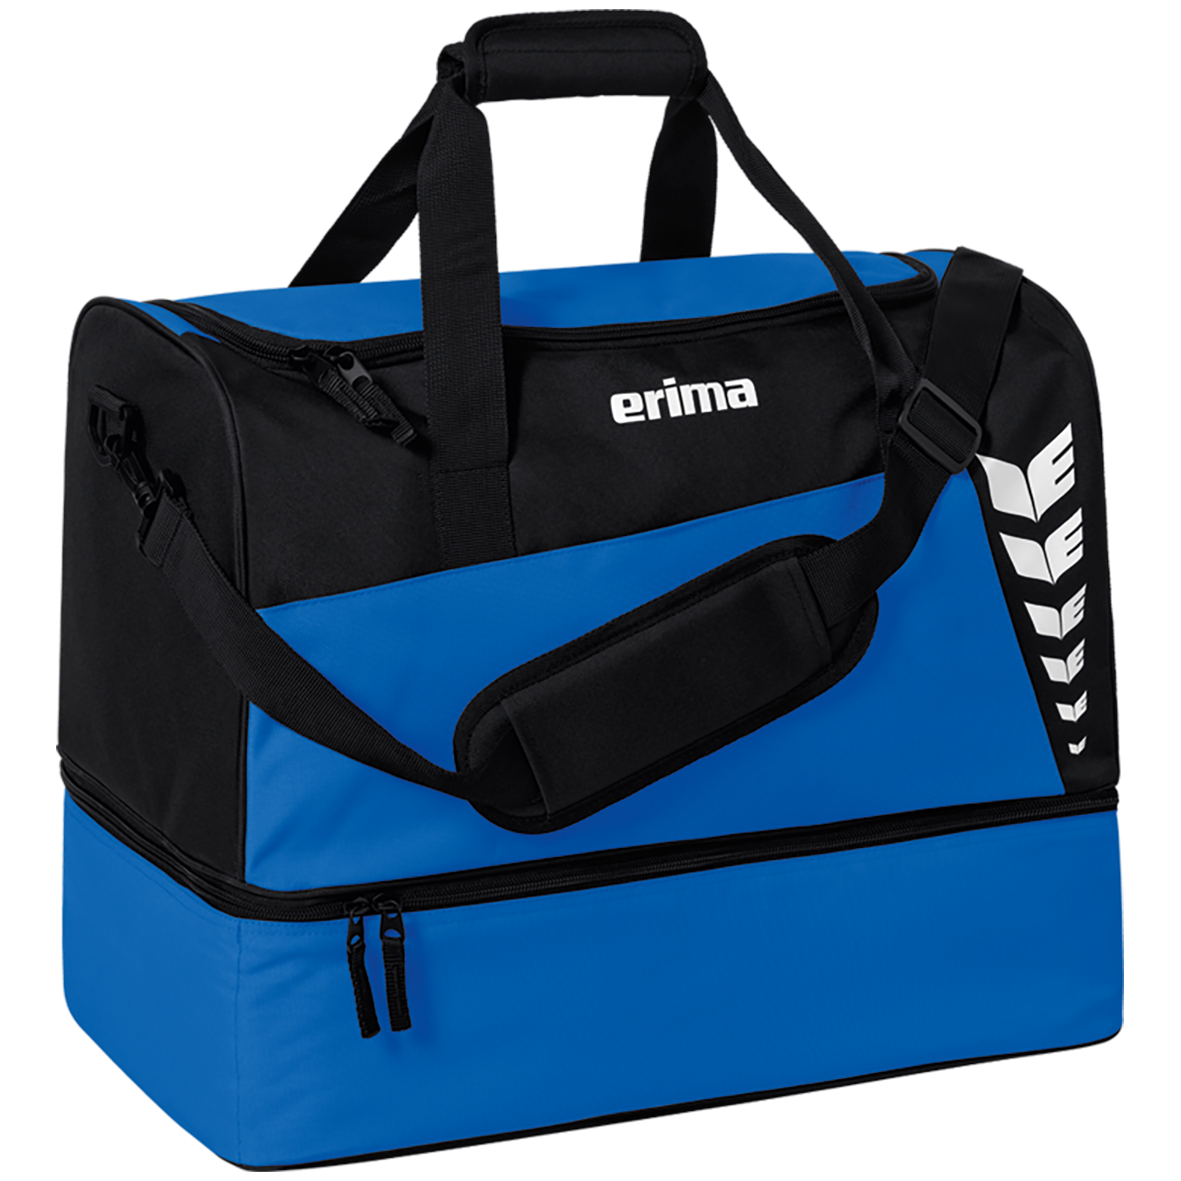 ERIMA SIX WINGS SPORTS BAG WITH BOTTOM COMPARTMENT, NEW ROYAL-BLACK.